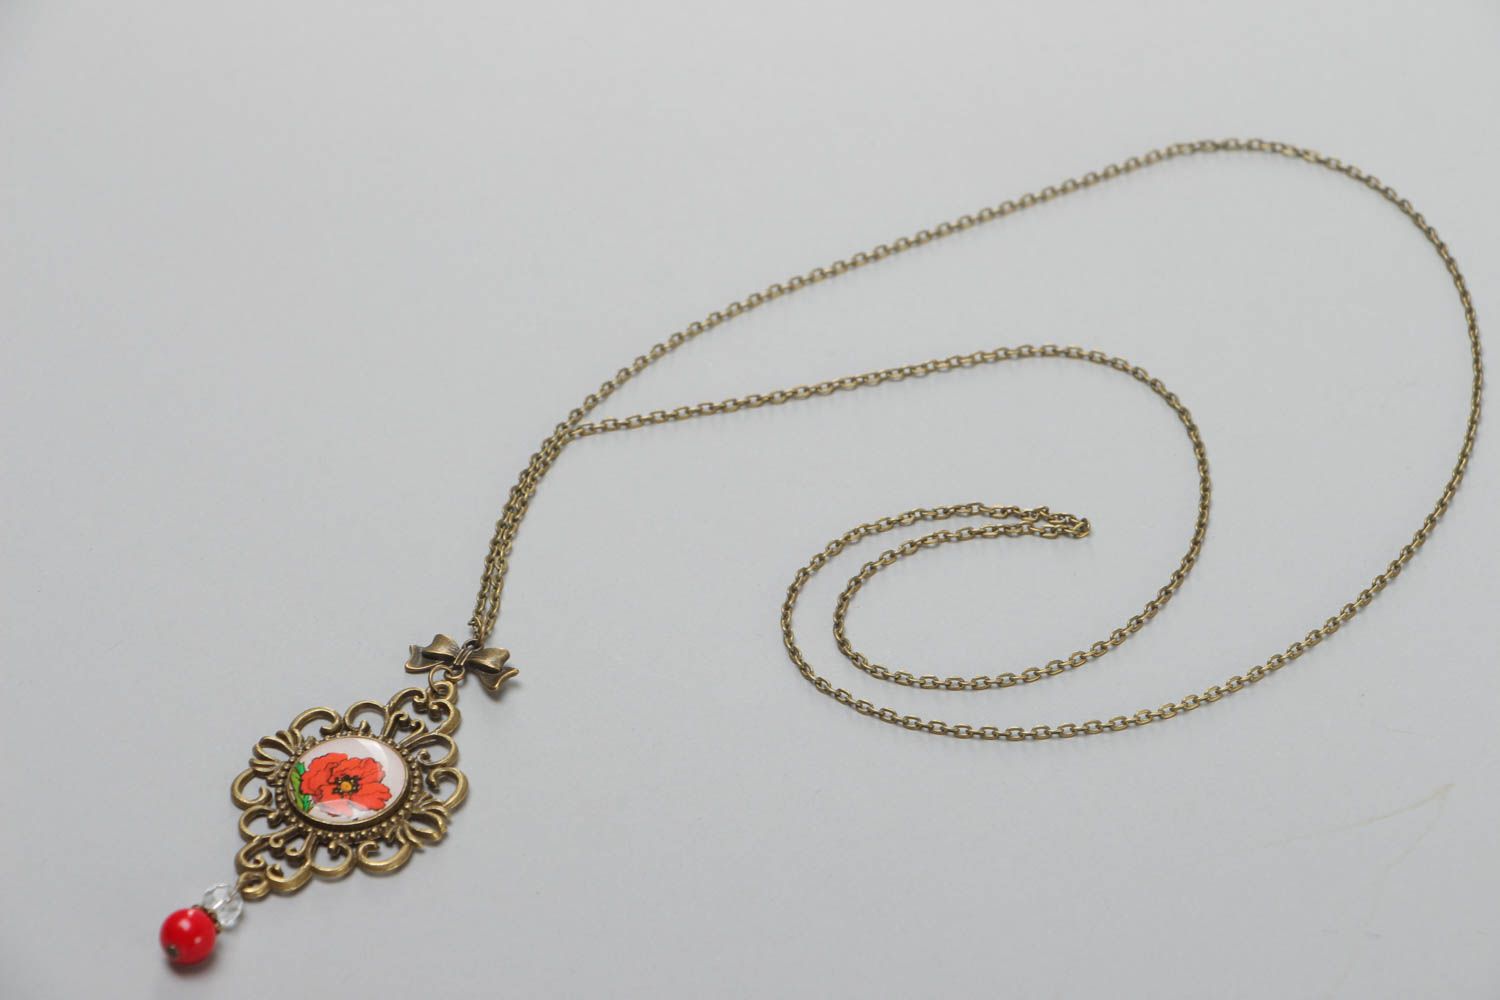 Handmade neck pendant on metal basis with glass-like glaze on chain Red Poppy photo 2